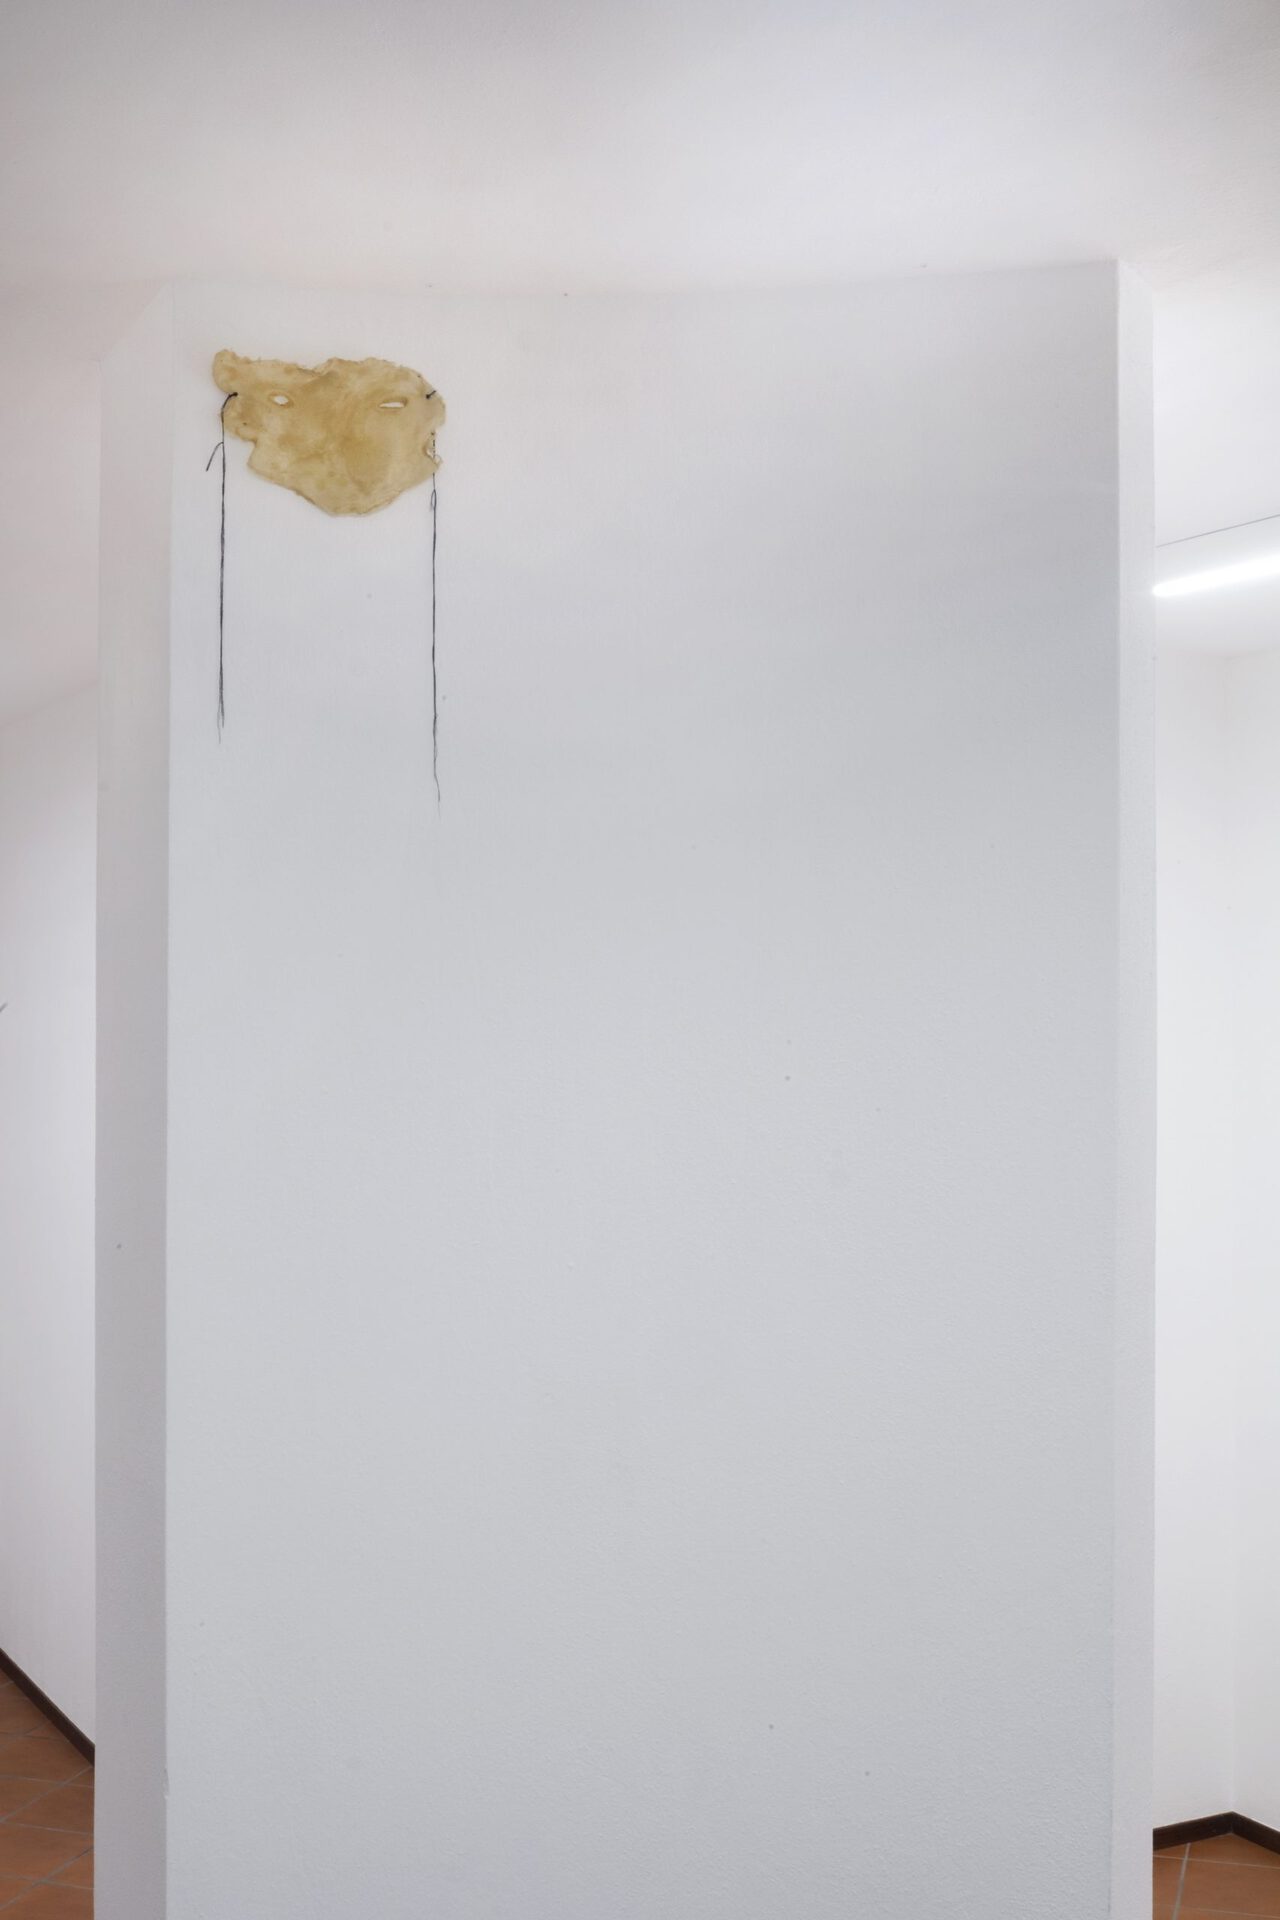 Lisa Lurati Untitled variable measures pigmented latex and cotton threads 2020